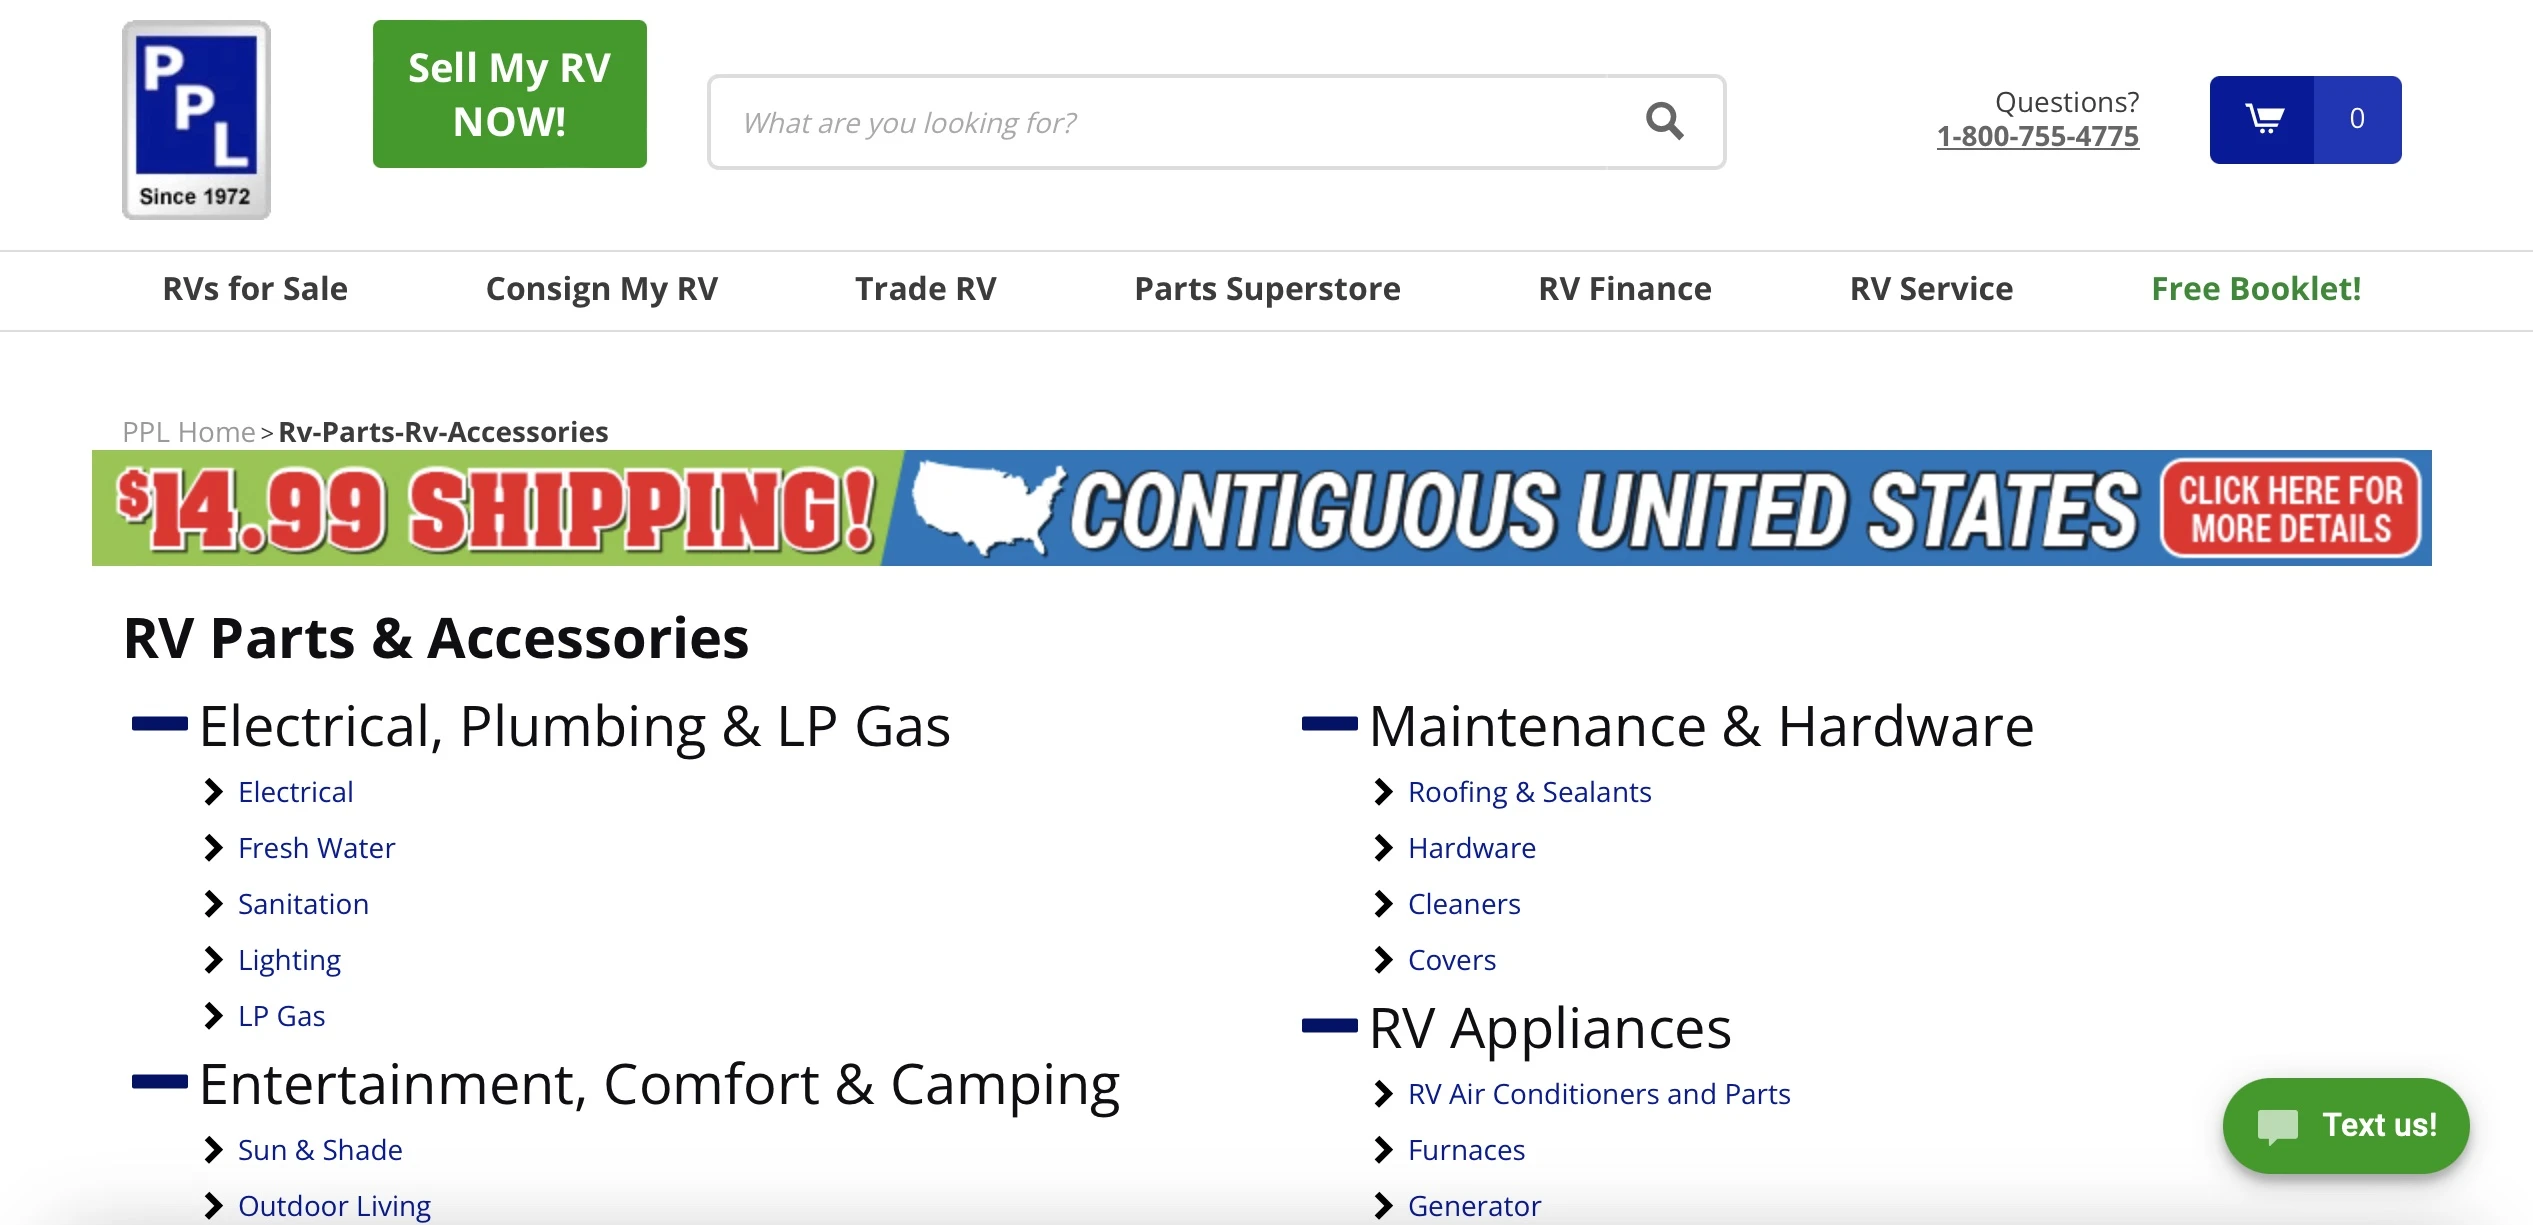 Web page for ordering parts and accessories from PPL Motor Homes